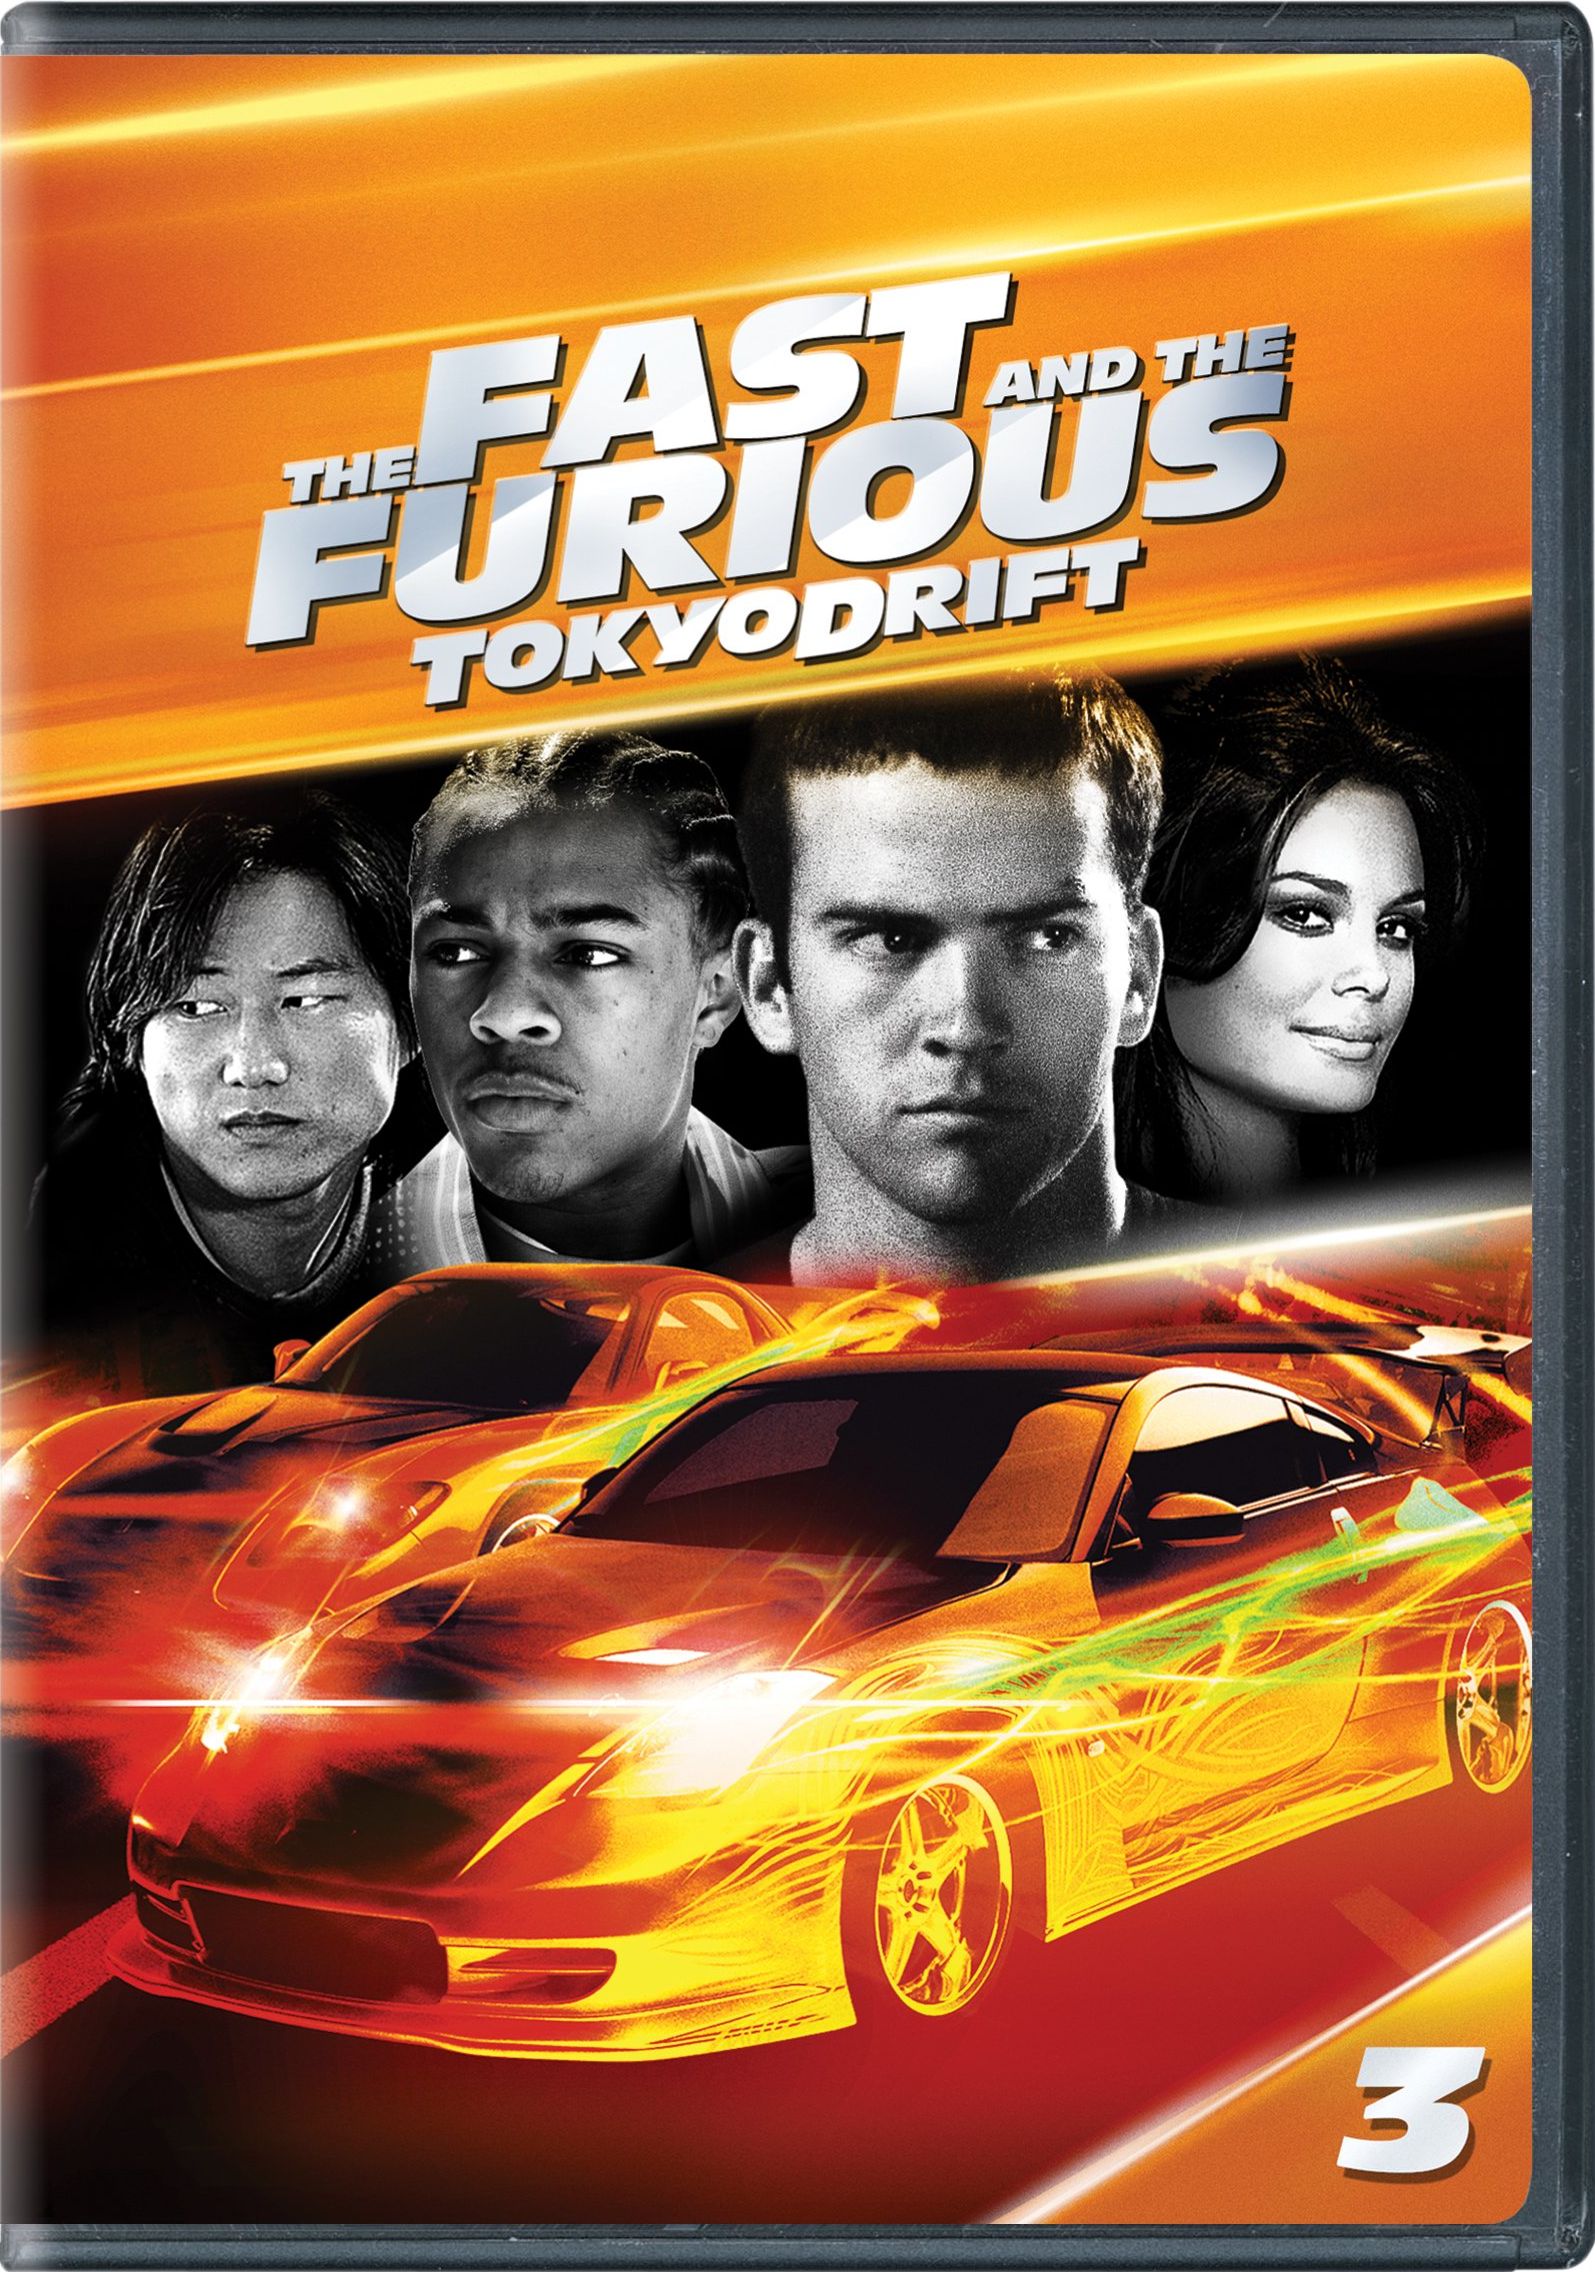 The Fast and the Furious: Tokyo Drift DVD Release Date July 28, 20091595 x 2272